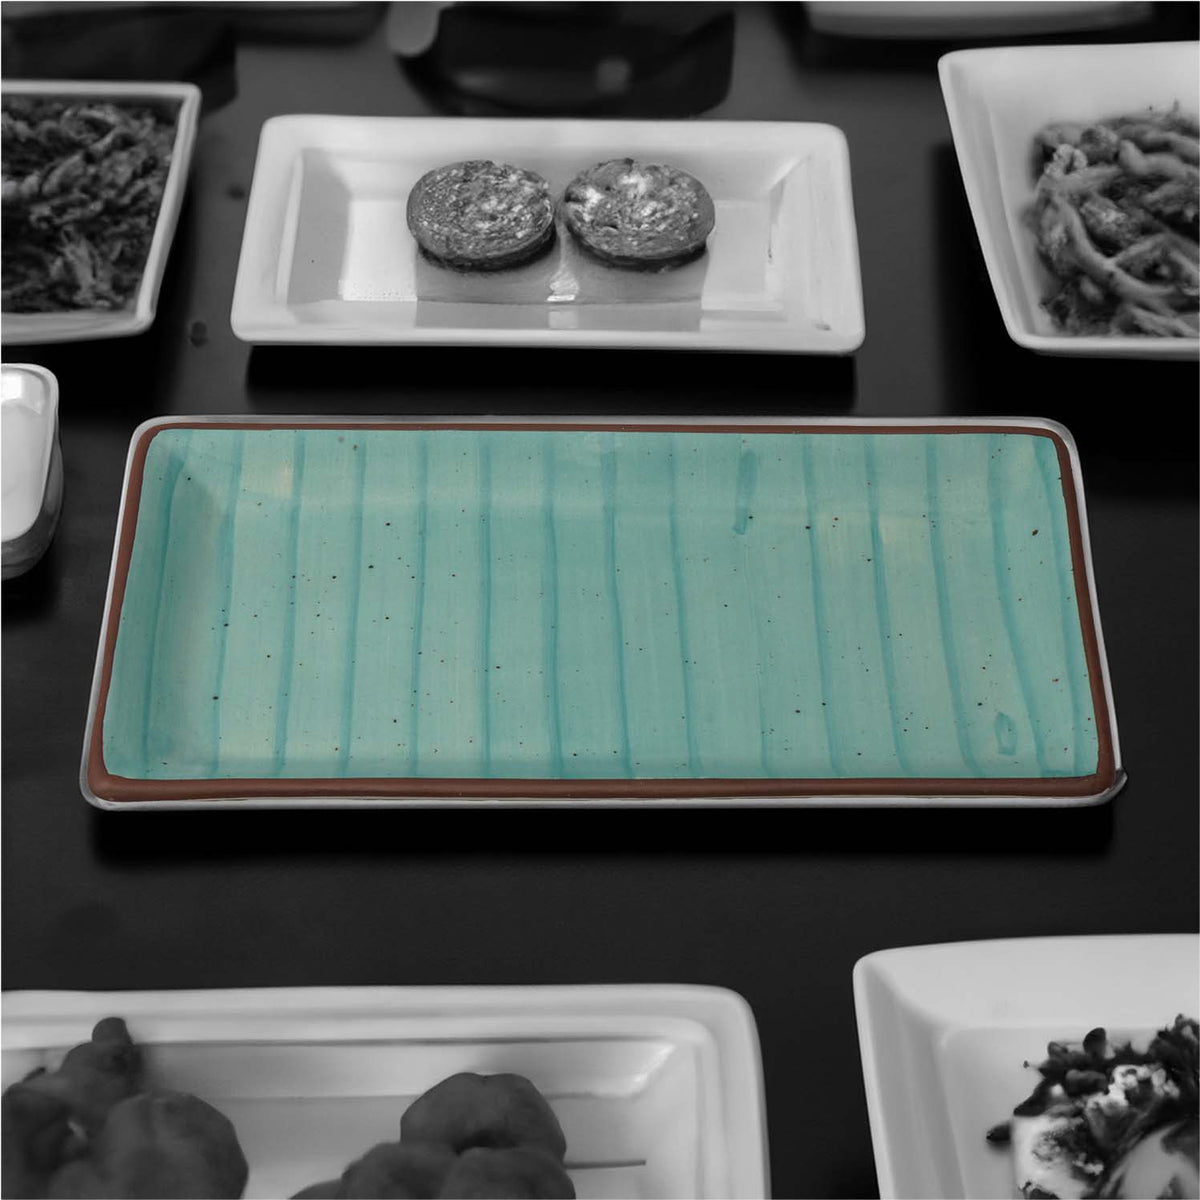 Claymistry Ceramic Dinner & Snack Blue with Brown Edge Rectangle Serving Tray | 31cm * 16cm * 3cm | Glossy | Dishwasher & Microwave Safe | Water, Juice, Tea, Coffee Tray | Premium Kitchen Crockery